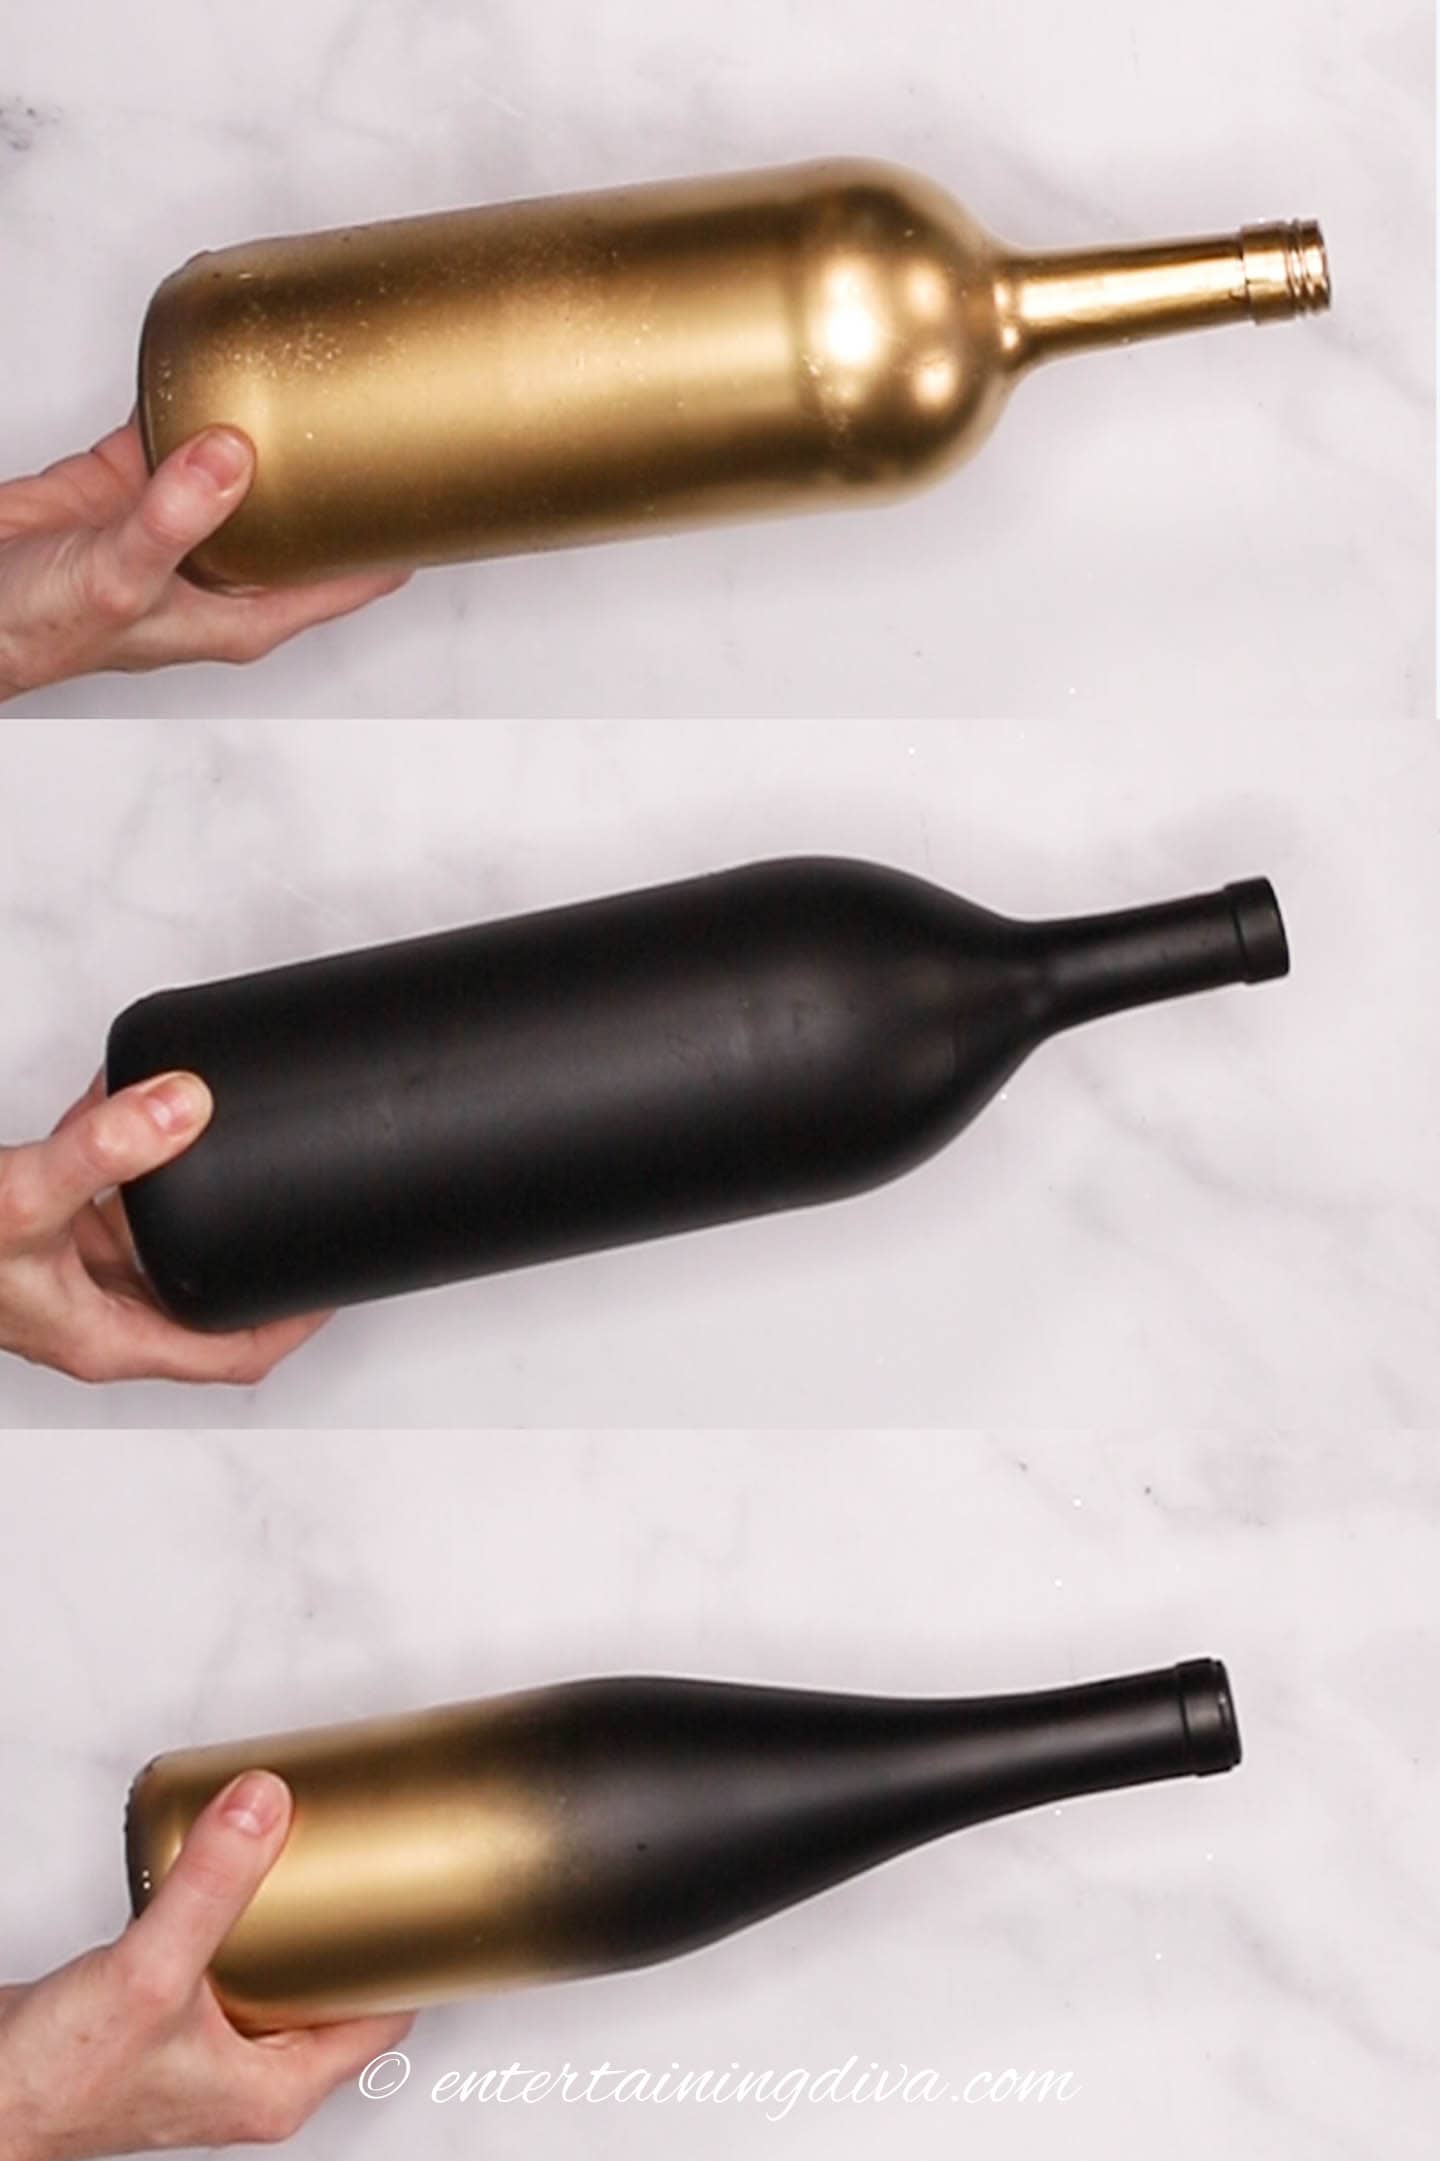 a wine bottle spray painted gold, a wine bottle spray painted black and a wine bottle spray painted in two-tone black and gold